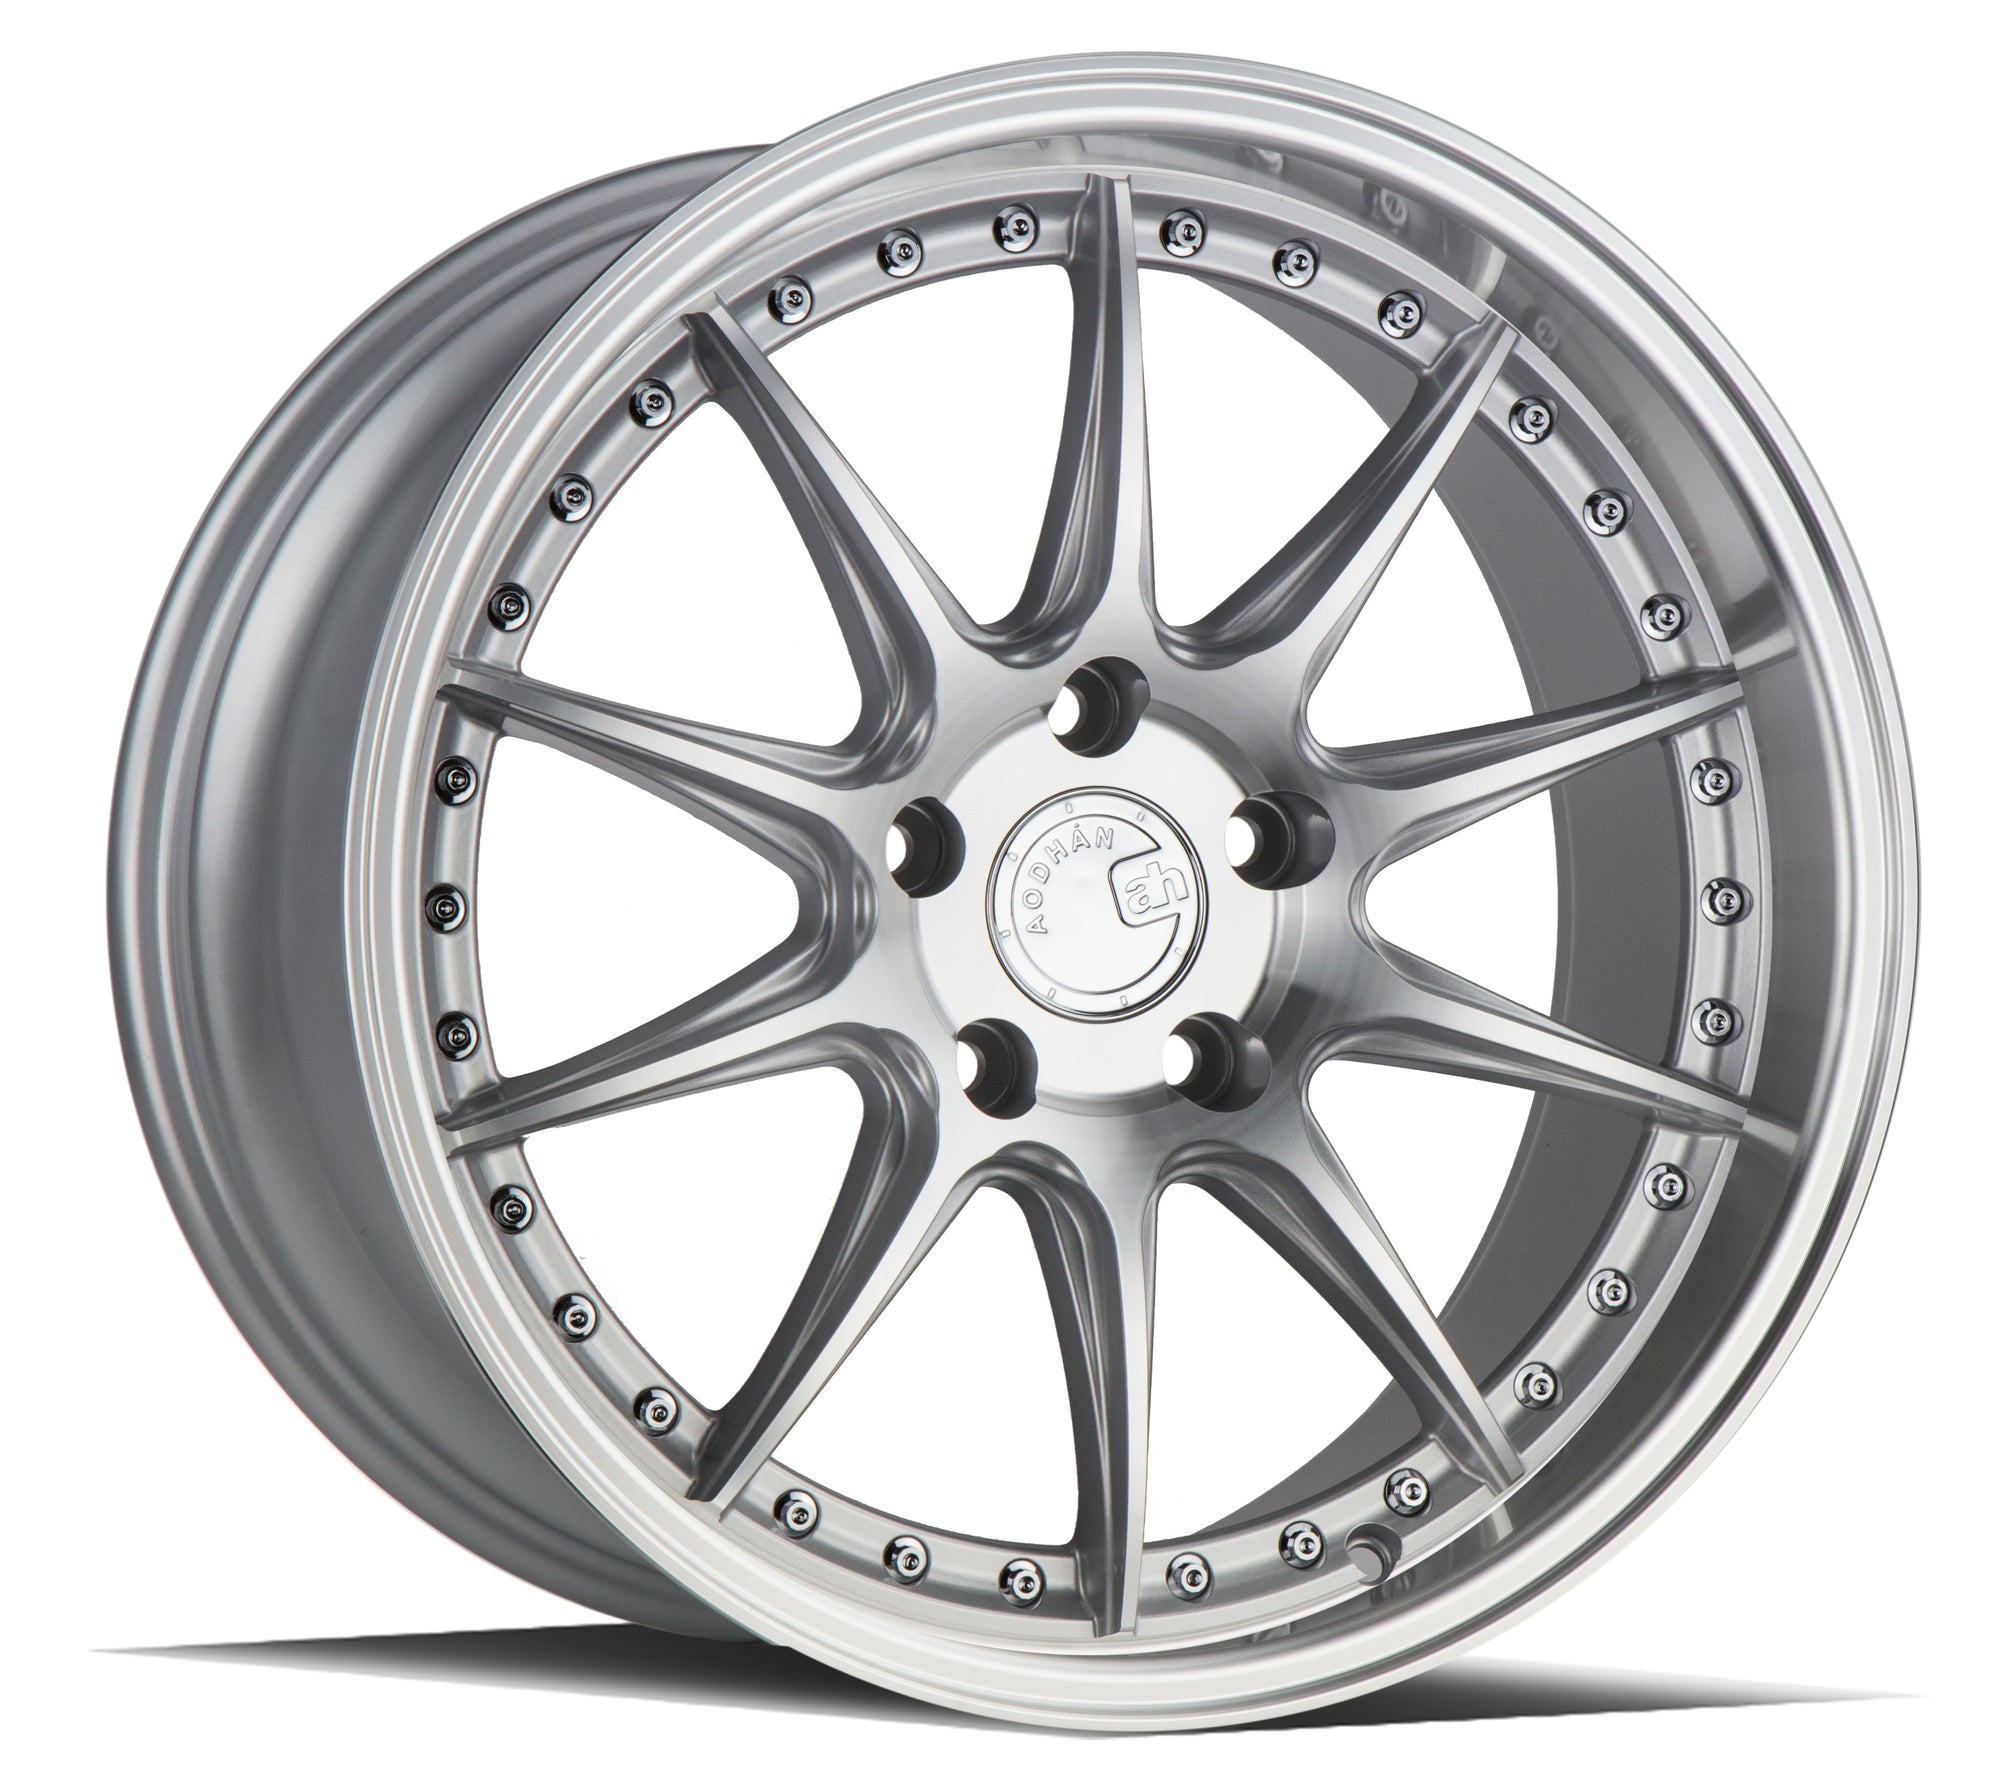 Aodhan DS07 18x9.5 5x100 +35 Silver w/Machined Face